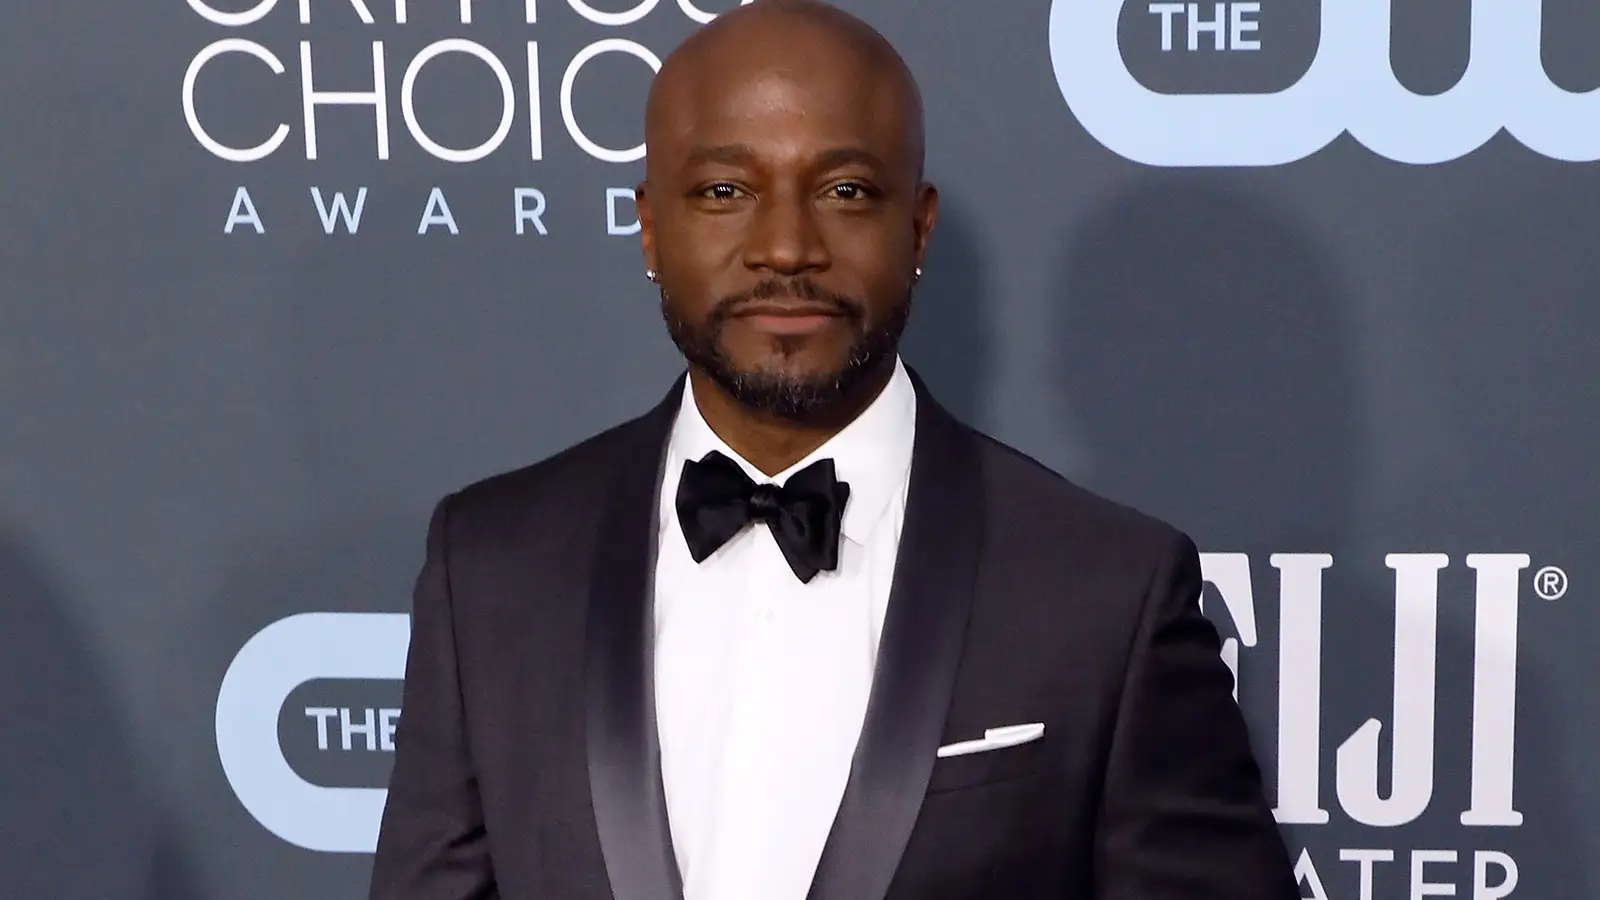 All American’: Taye Diggs Explains Why He Left The Series 